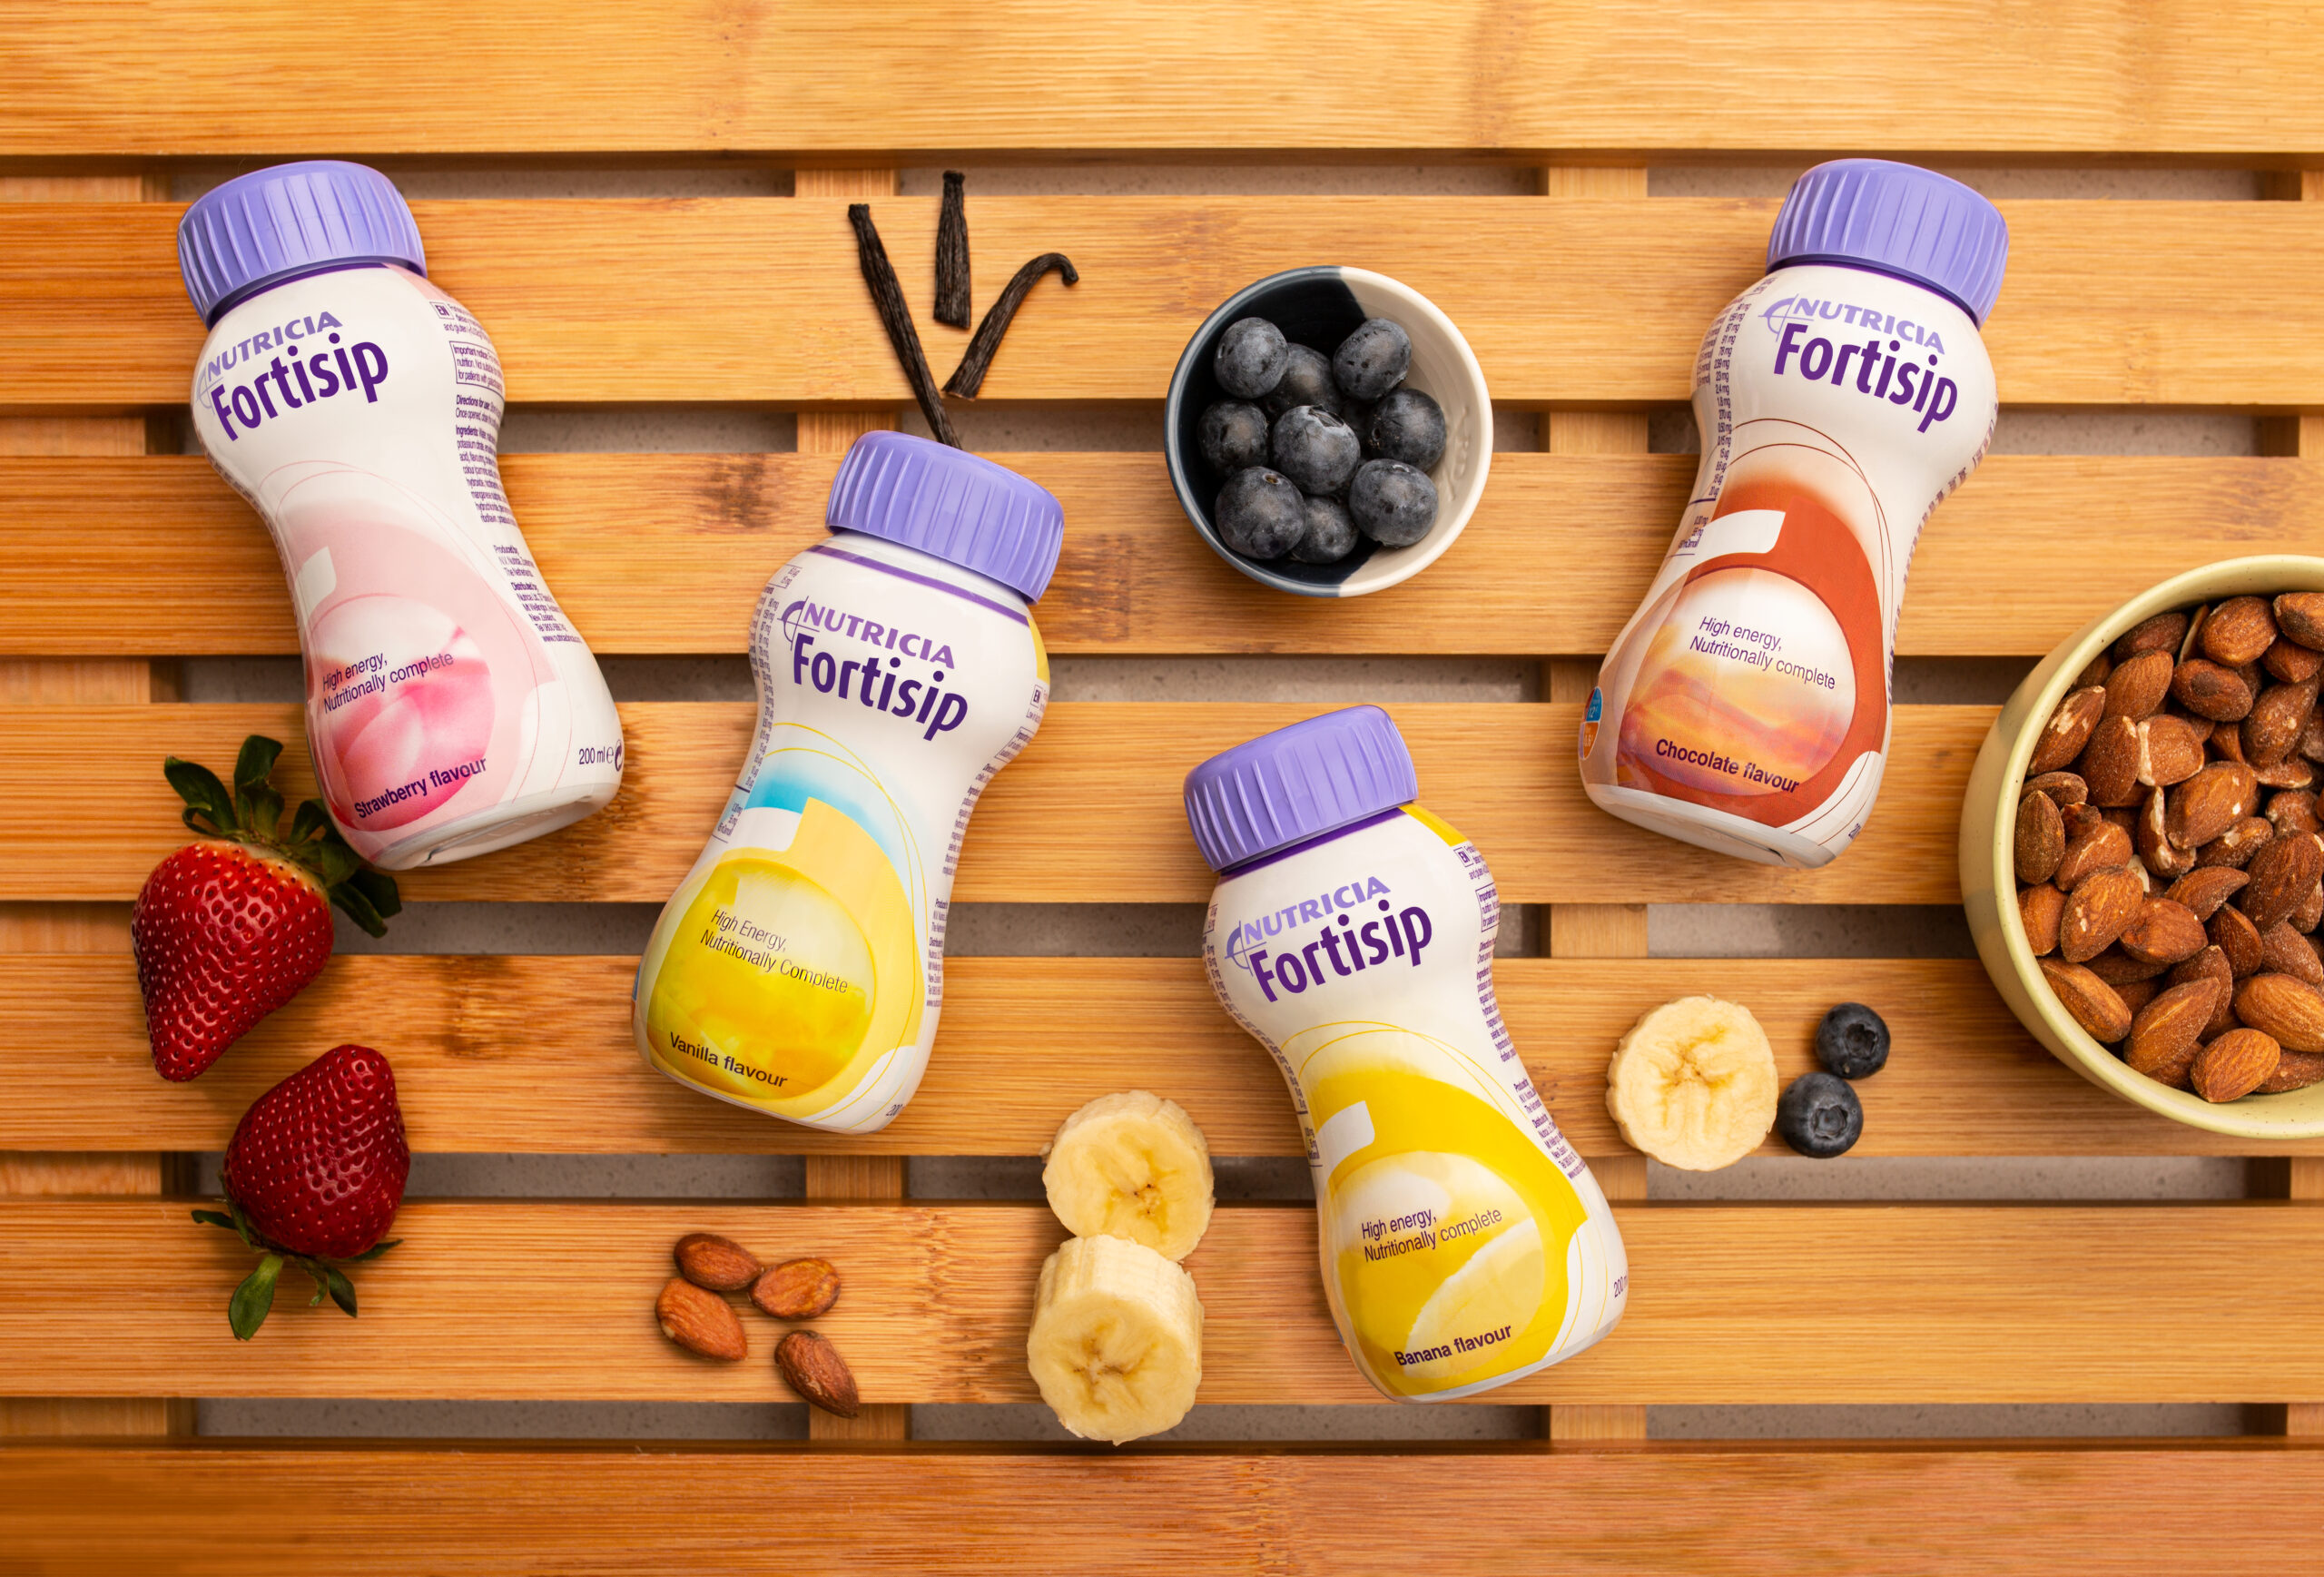 Delicious recipes using Fortisip, a nutritionally complete oral nutritional supplement.